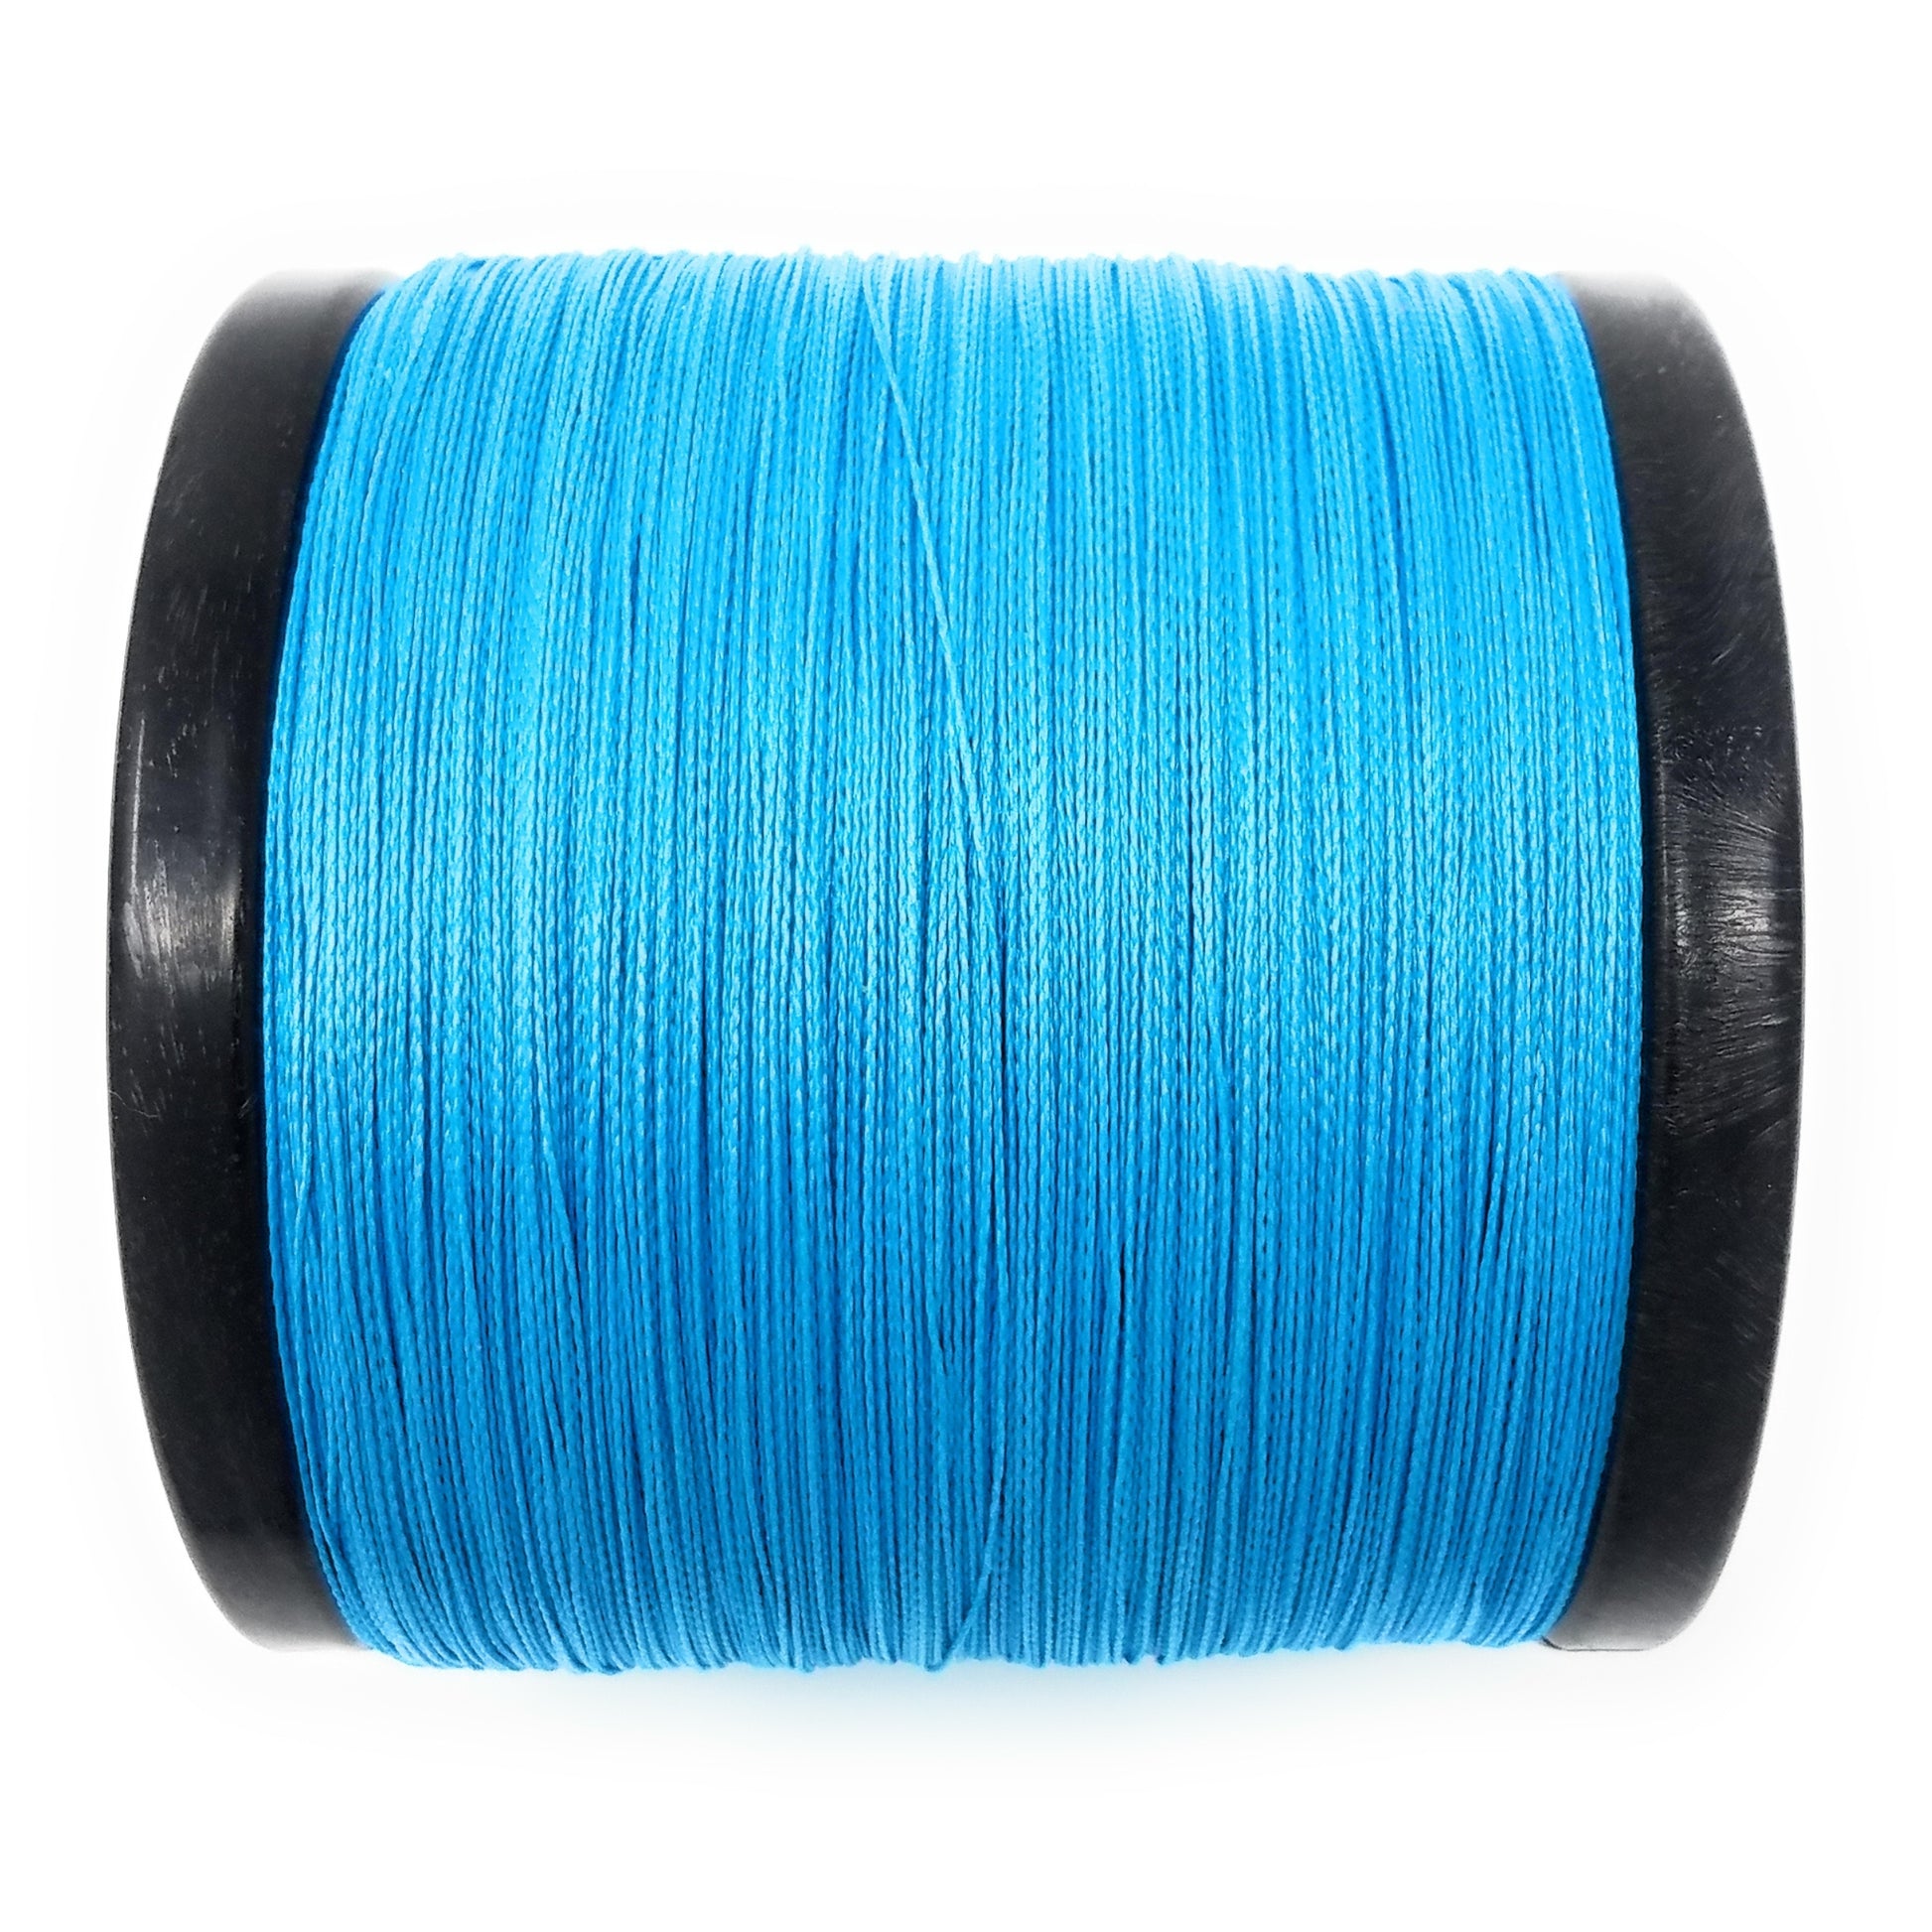 Reaction Tackle Braided Fishing Line Multi-Color 100lb 1000yd